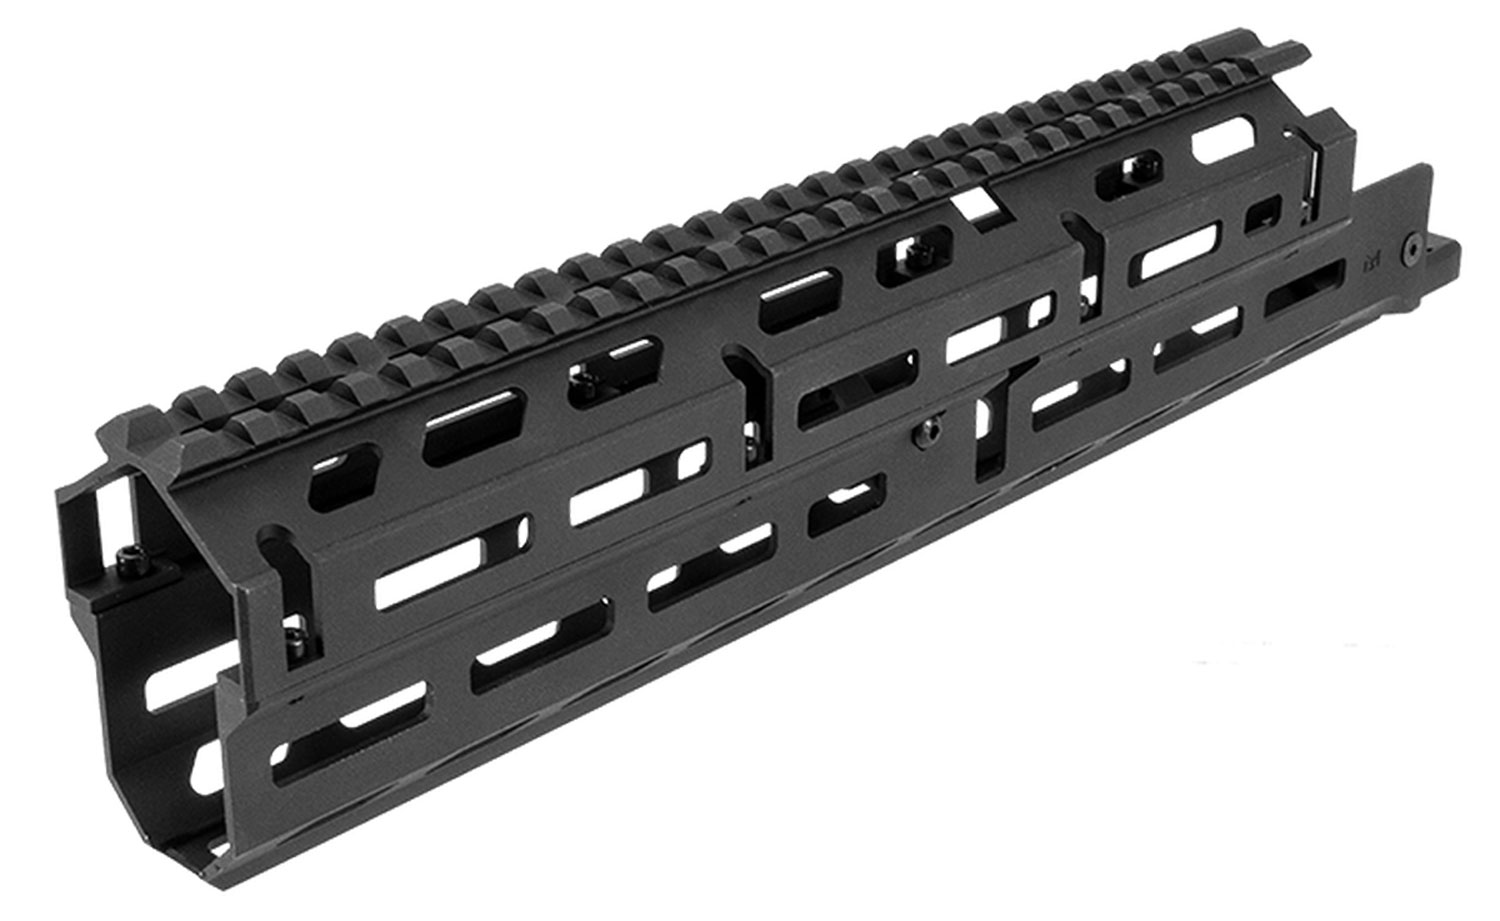 Aim Sports MMAK04 Handguard  Long & Drop-in, M-LOK 2-Piece Style Made of 6061-T6 Aluminum with Black Anodized Finish for AK-47